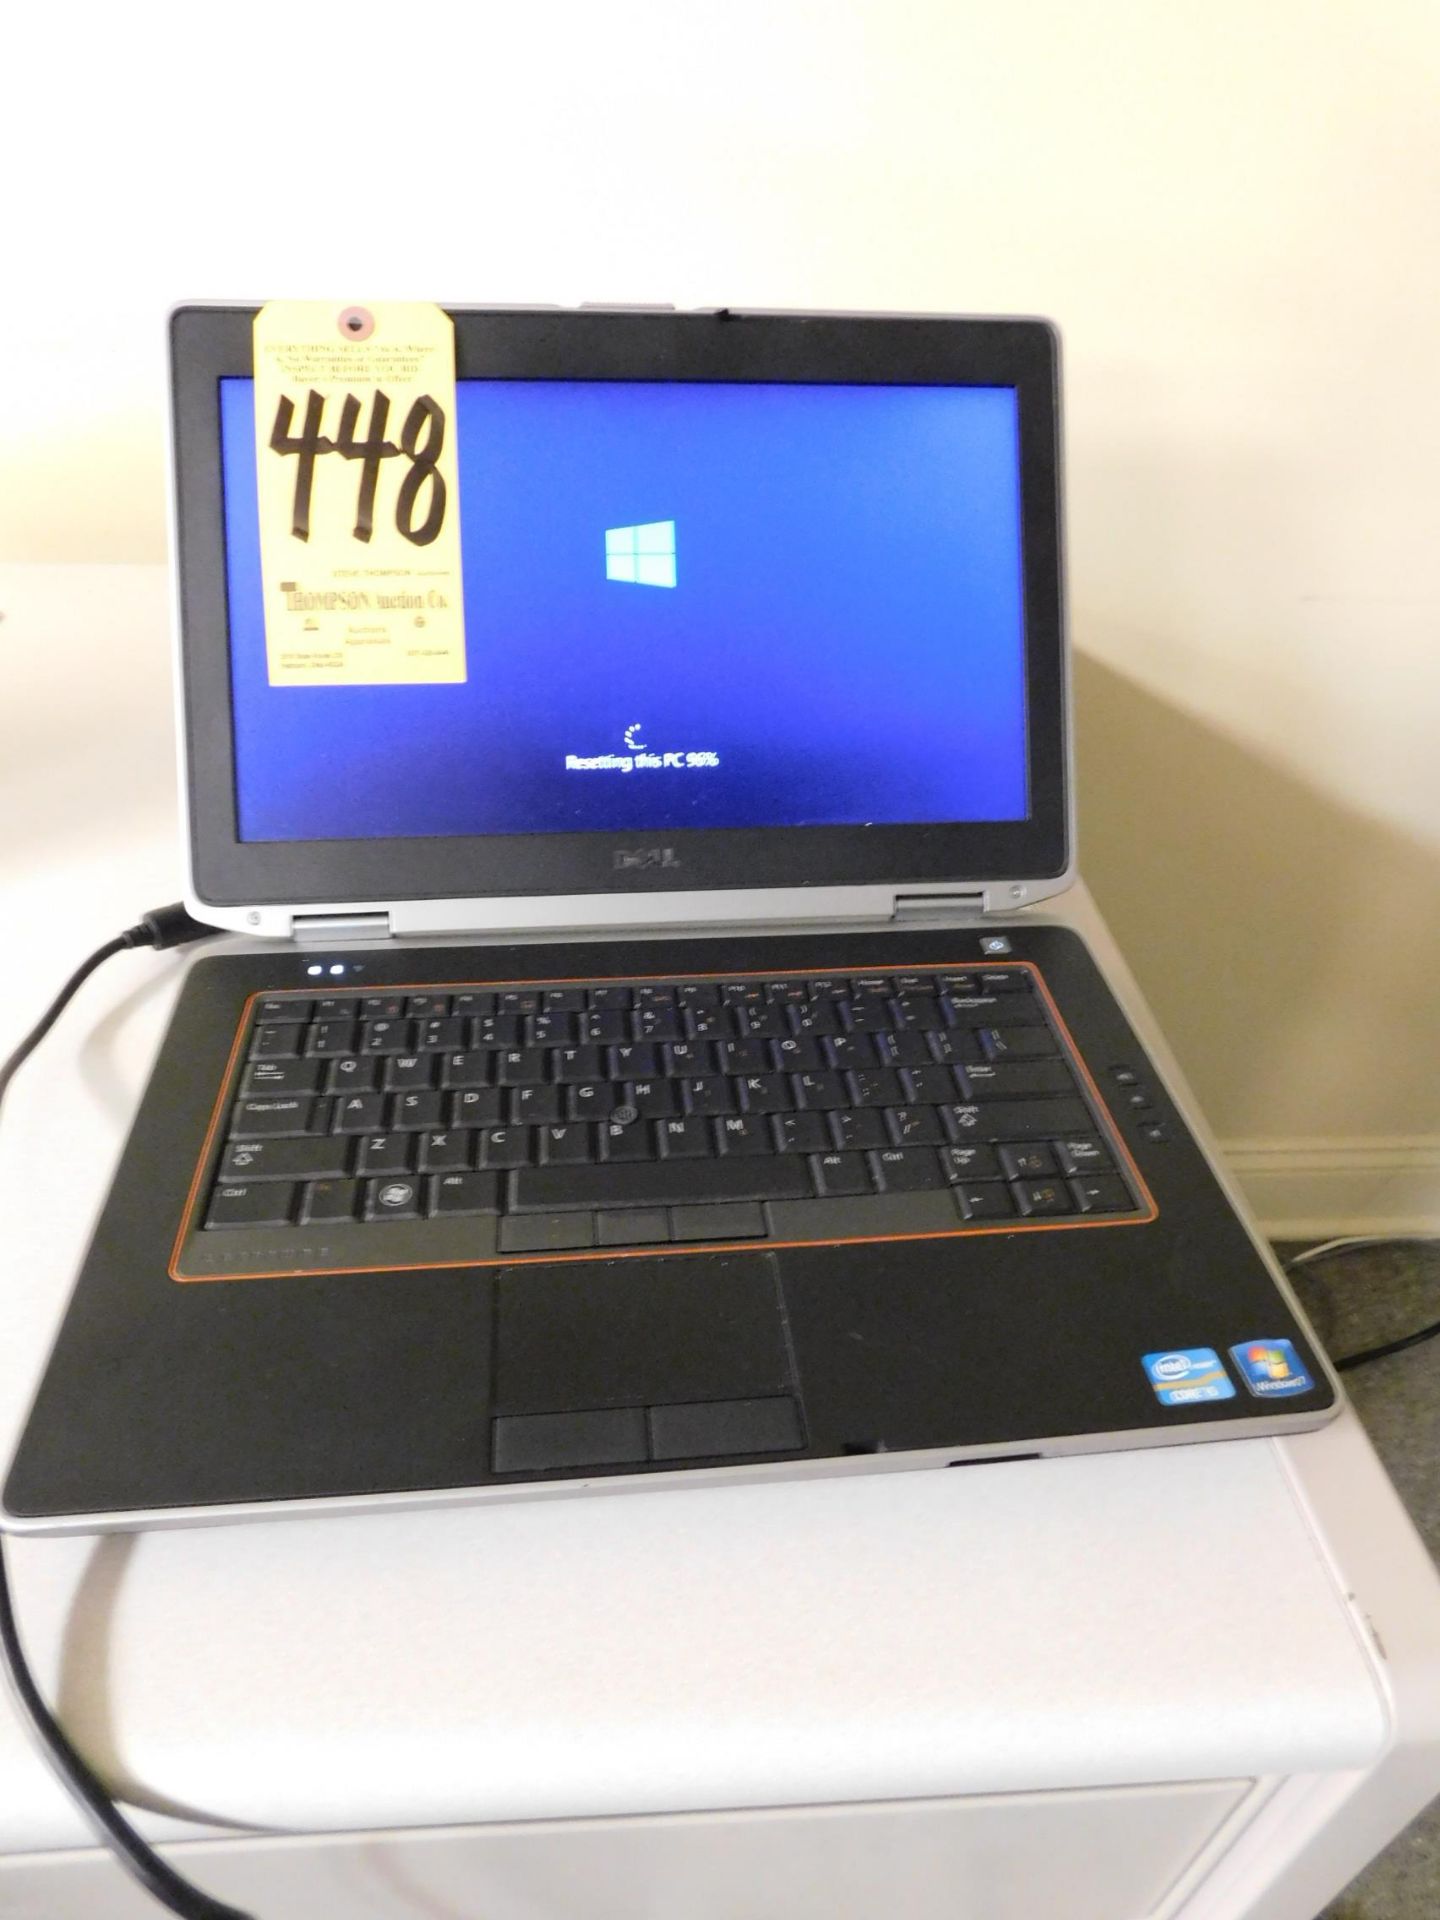 Dell Laptop with Windows 7